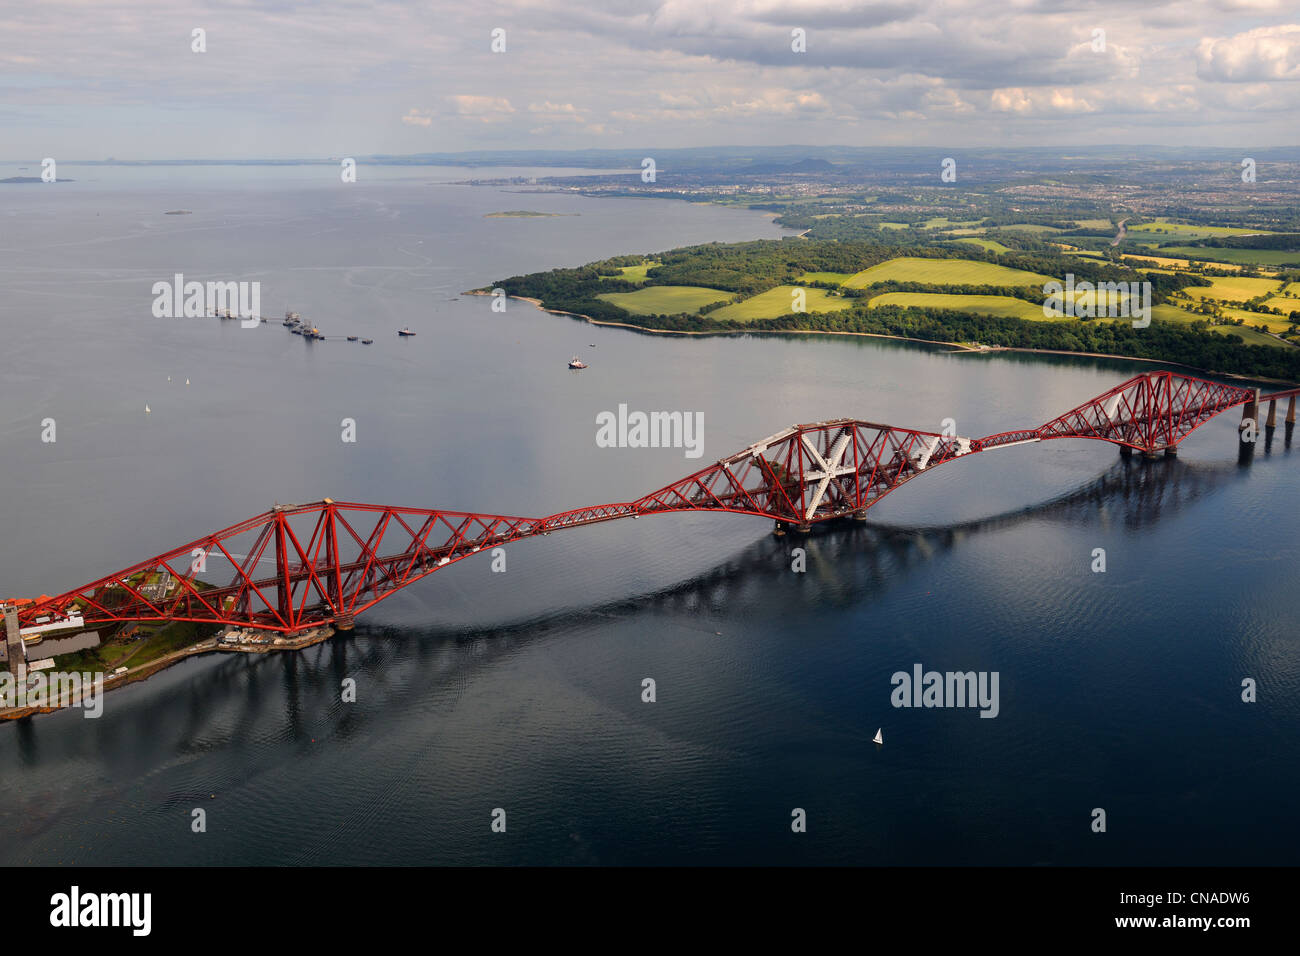 United Kingdom, Scotland, Firth of Forth, the Forth Railway Bridge and Edinburgh in the background (aerial view) Stock Photo